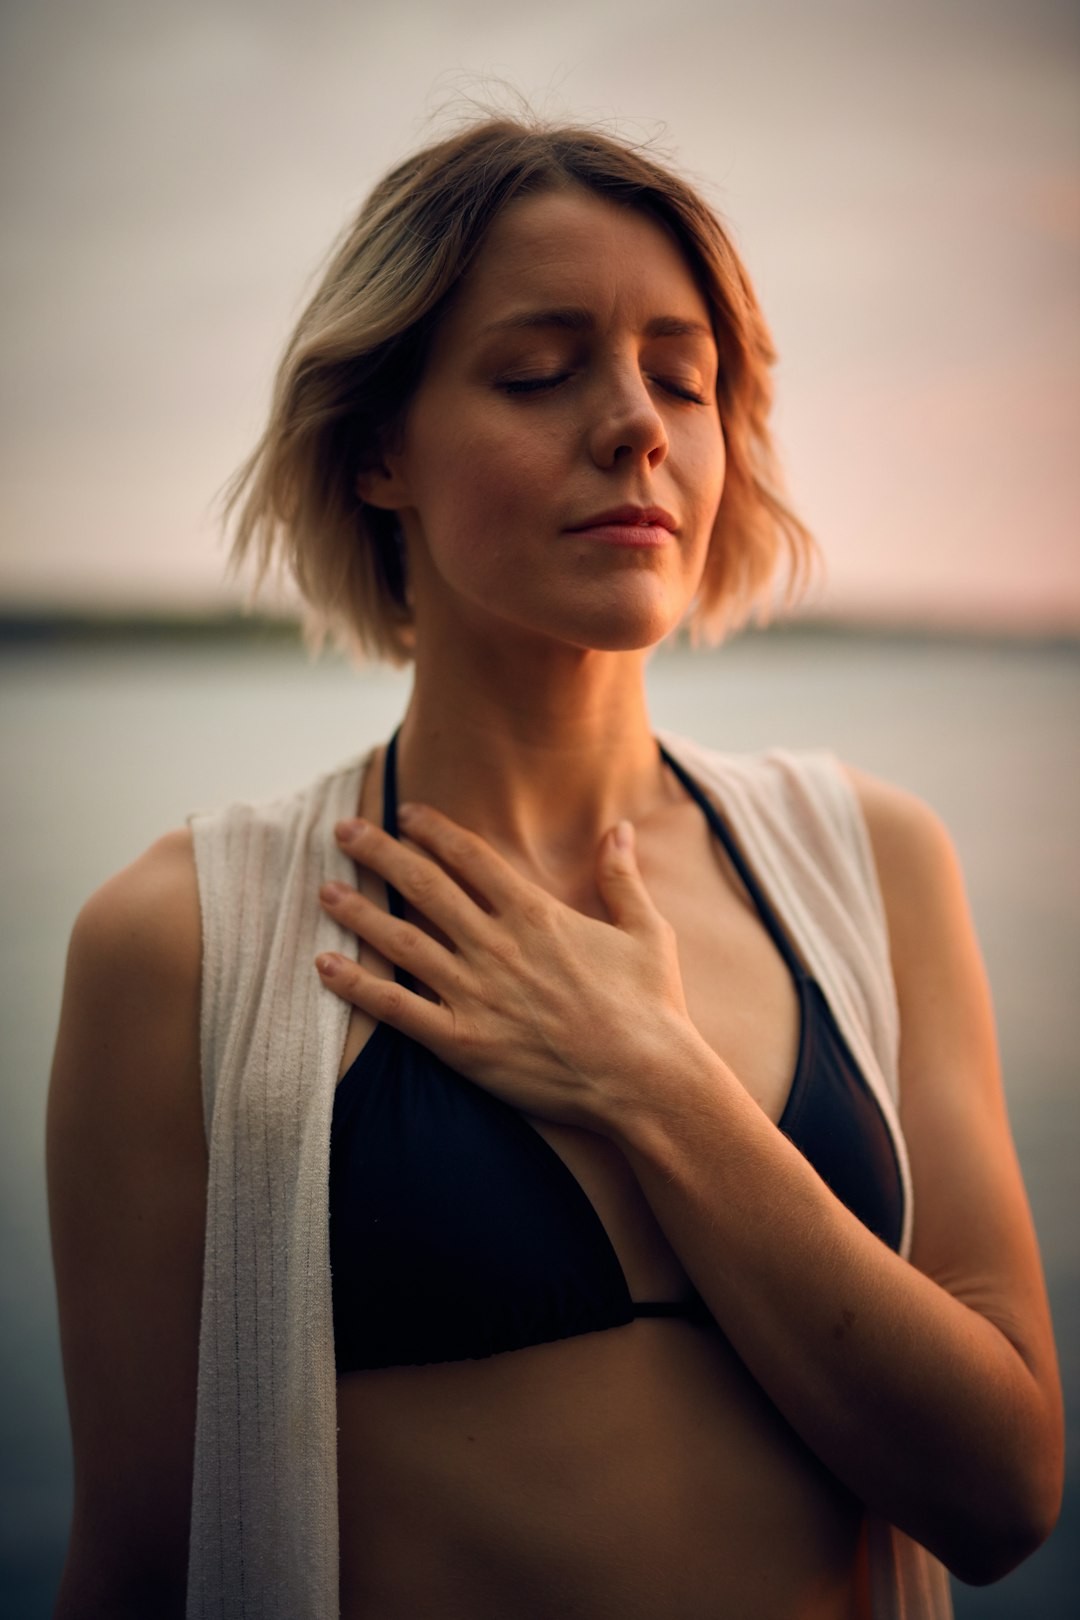 At Core Clinic, find an understanding of your current health and how to find your way to your optimal health. Our experts are here as your guide.